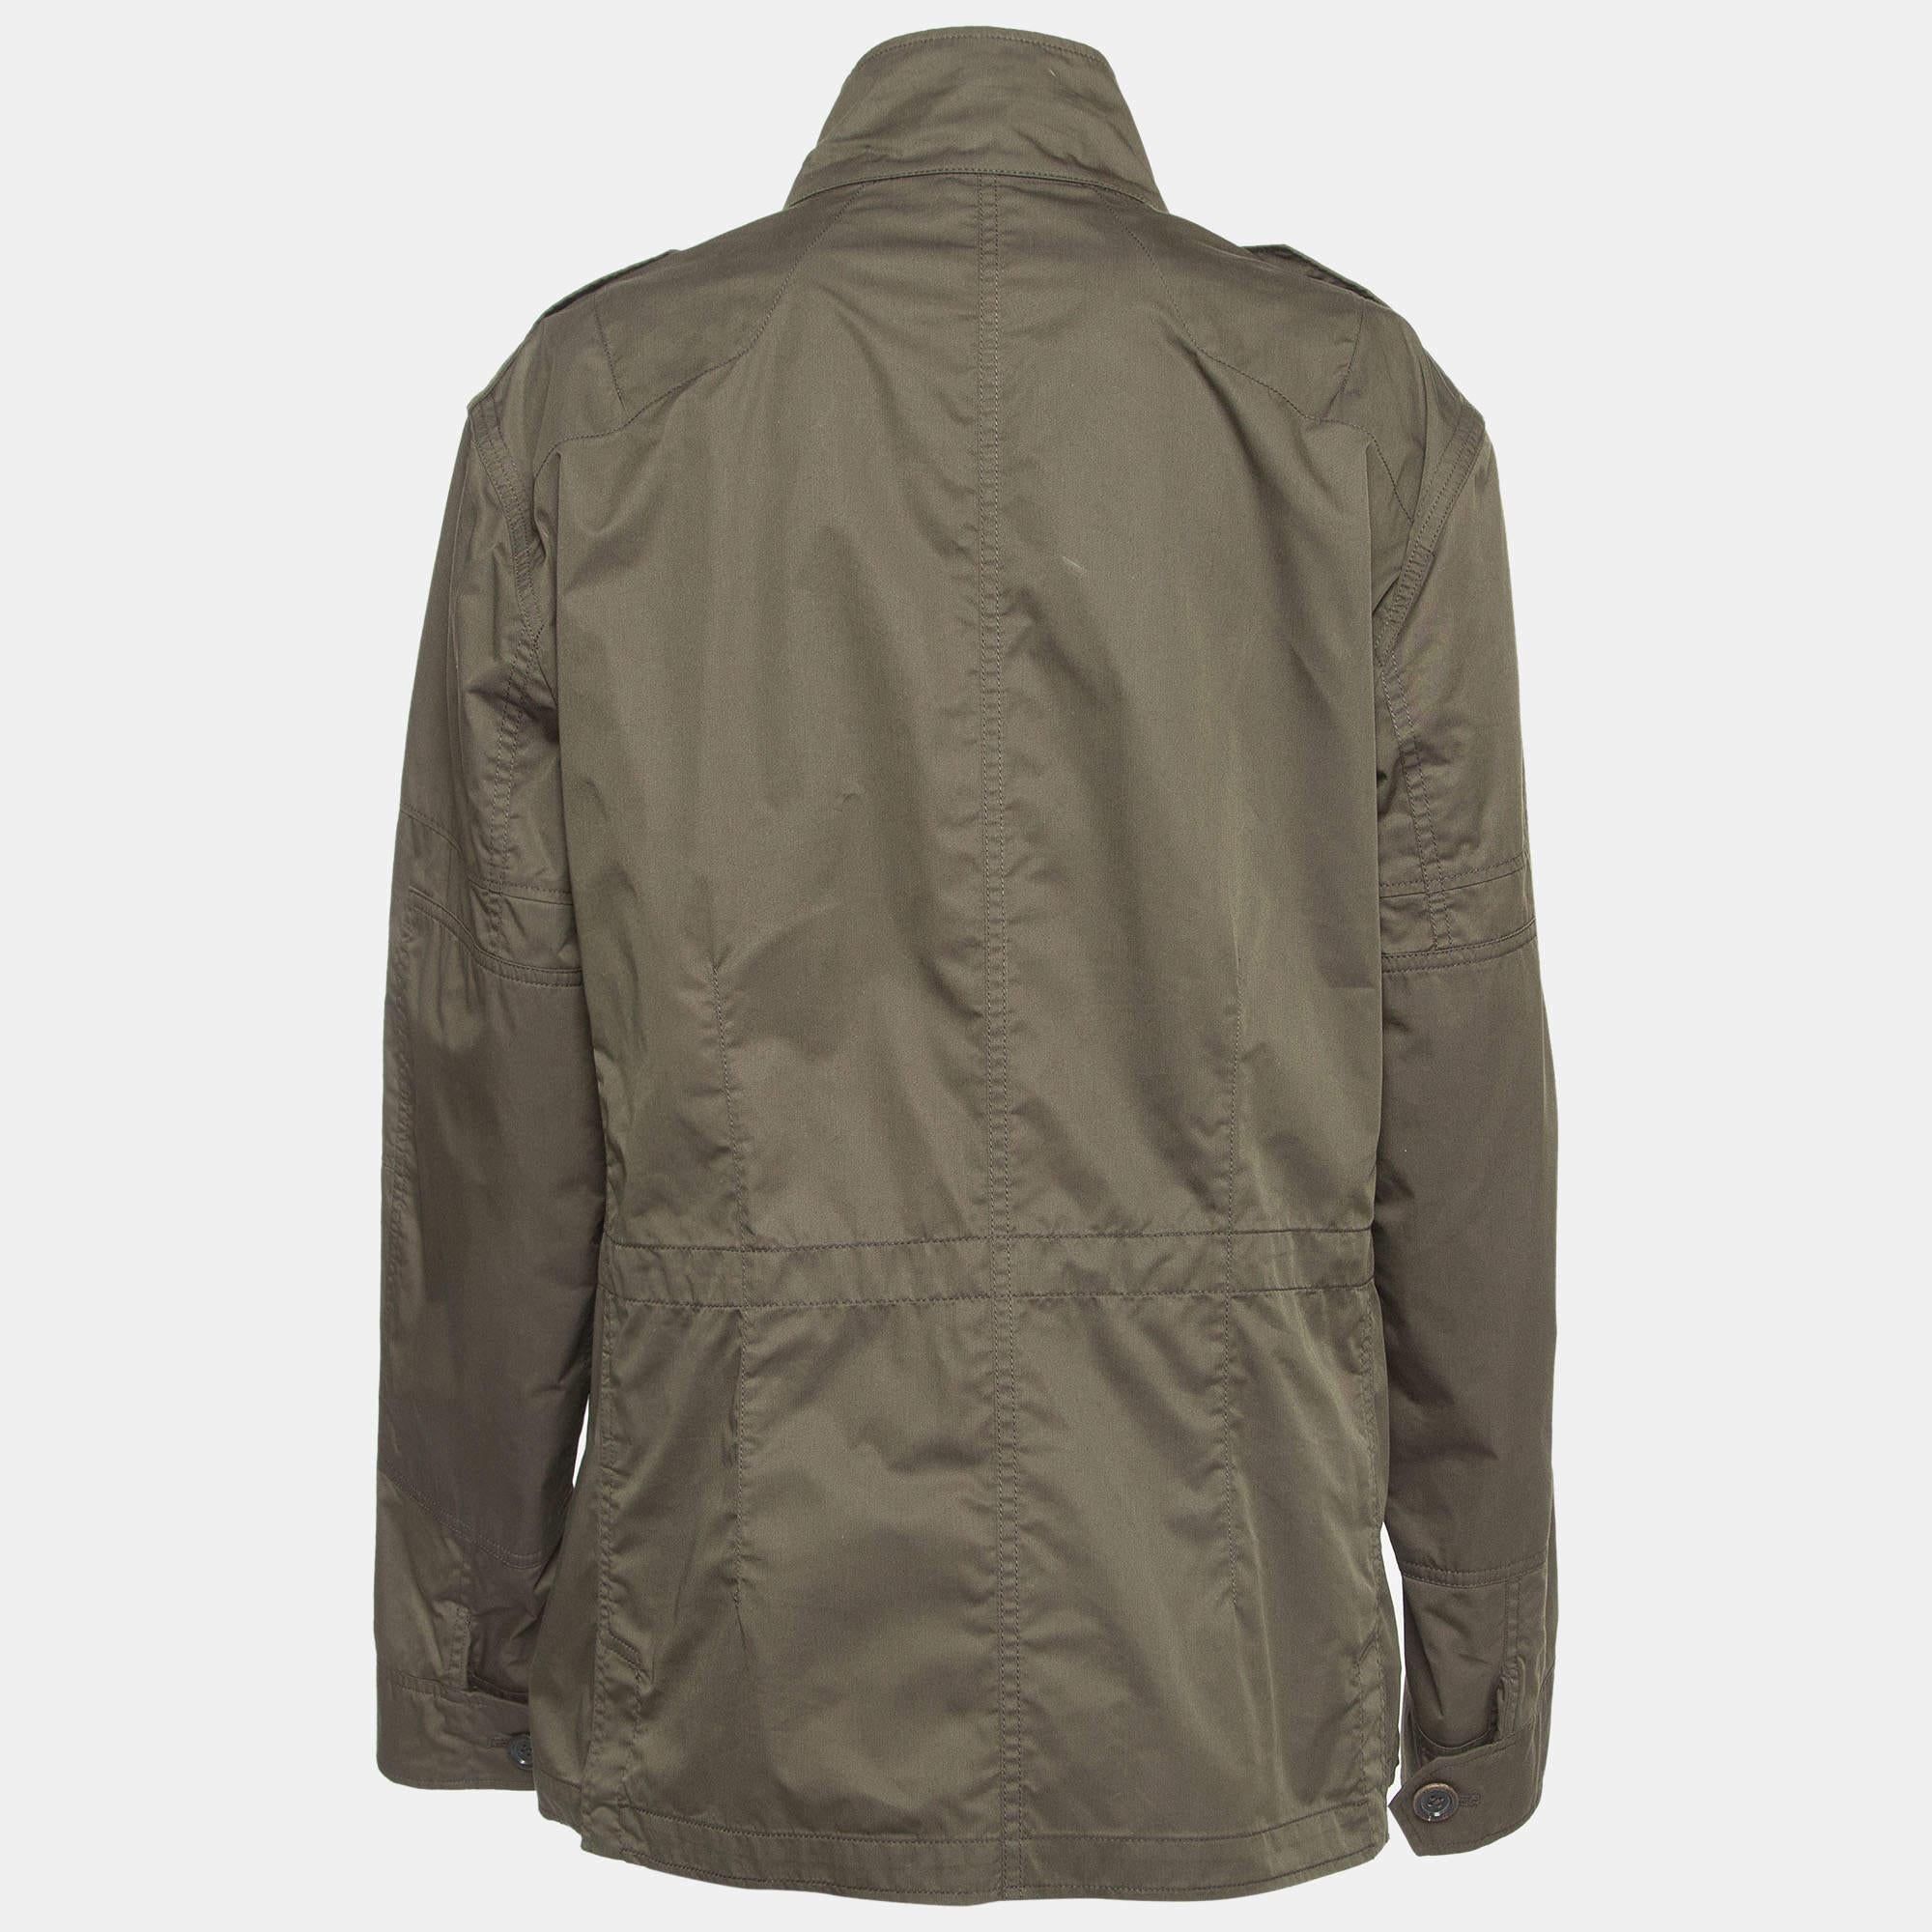 The Ralph Lauren jacket exudes timeless elegance and functionality. Crafted from a premium cotton blend, its sleek silhouette offers both style and protection against the elements. Featuring a versatile green hue, it effortlessly elevates any casual